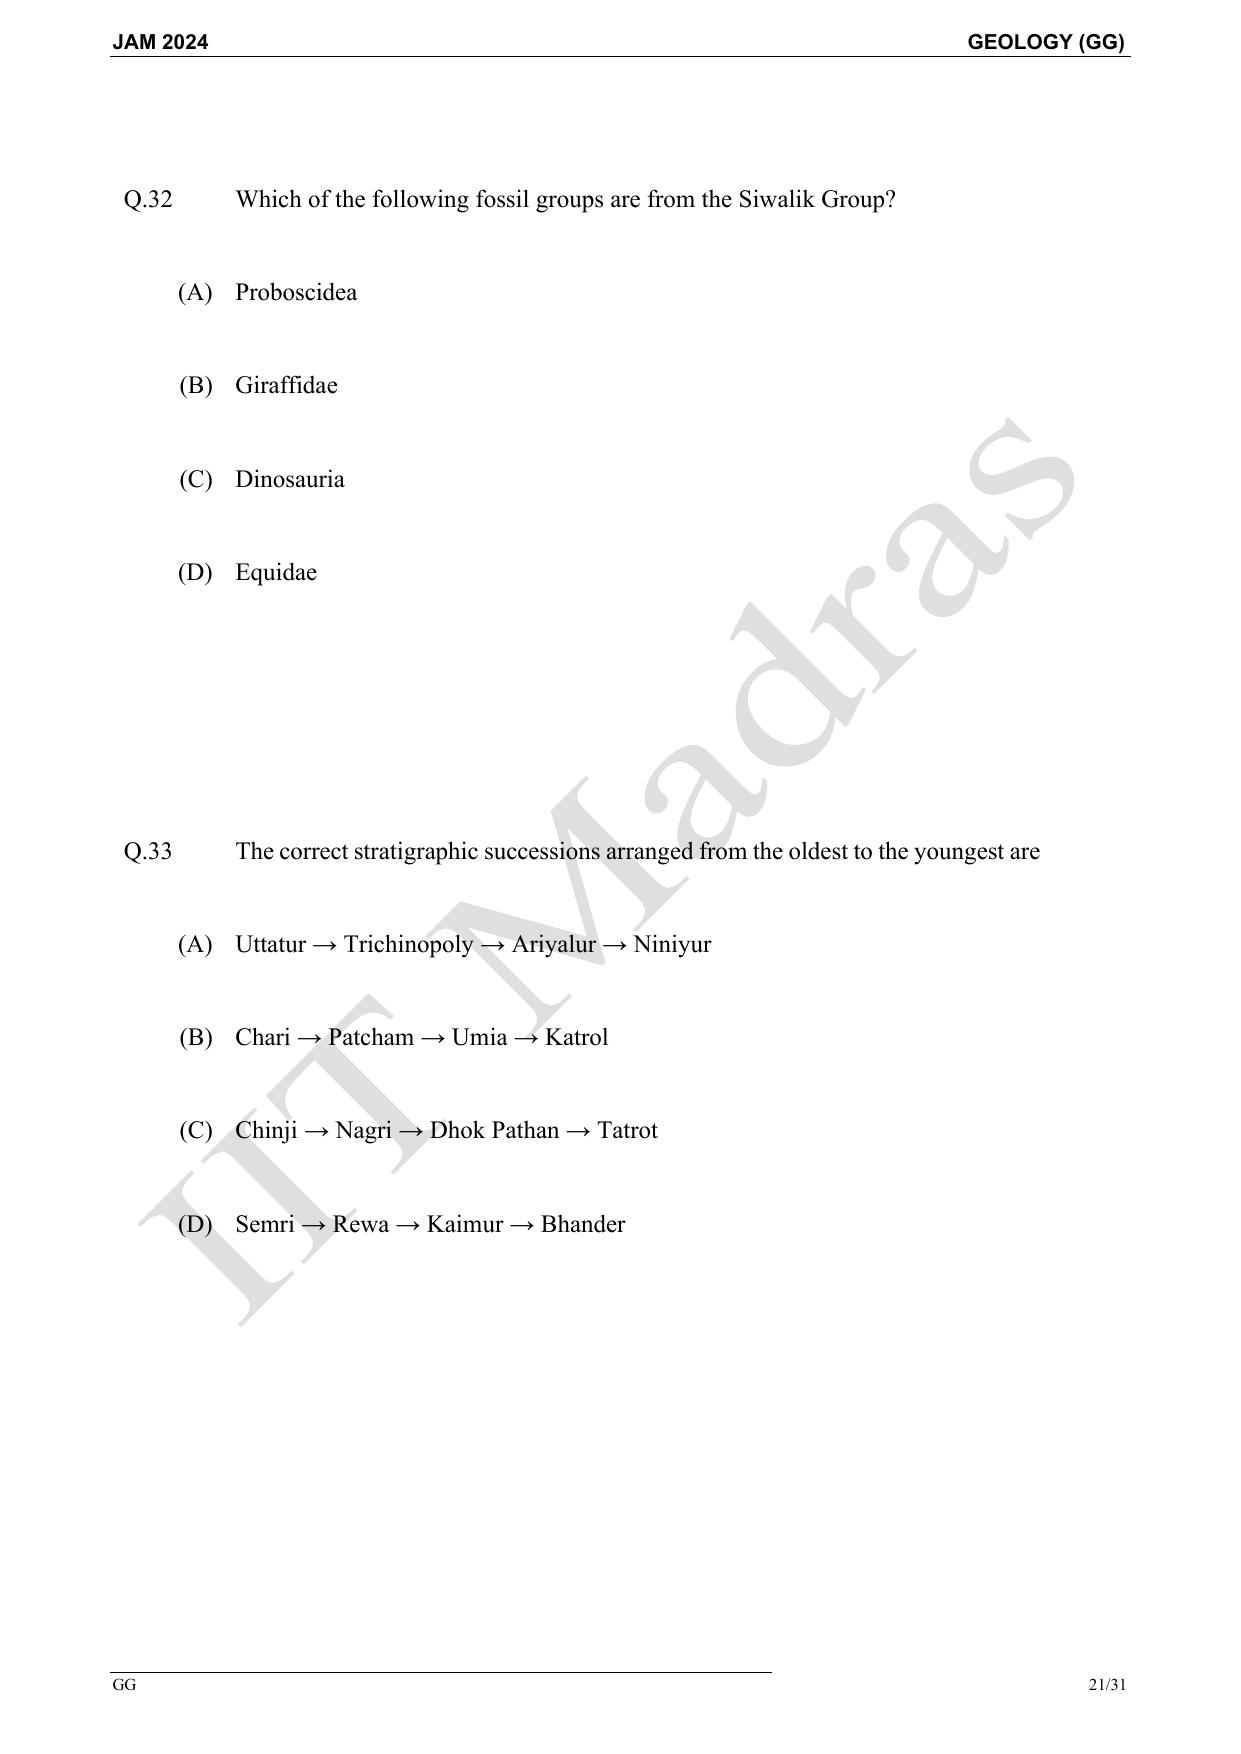 IIT JAM 2024 Geology (GG) Master Question Paper - Page 21